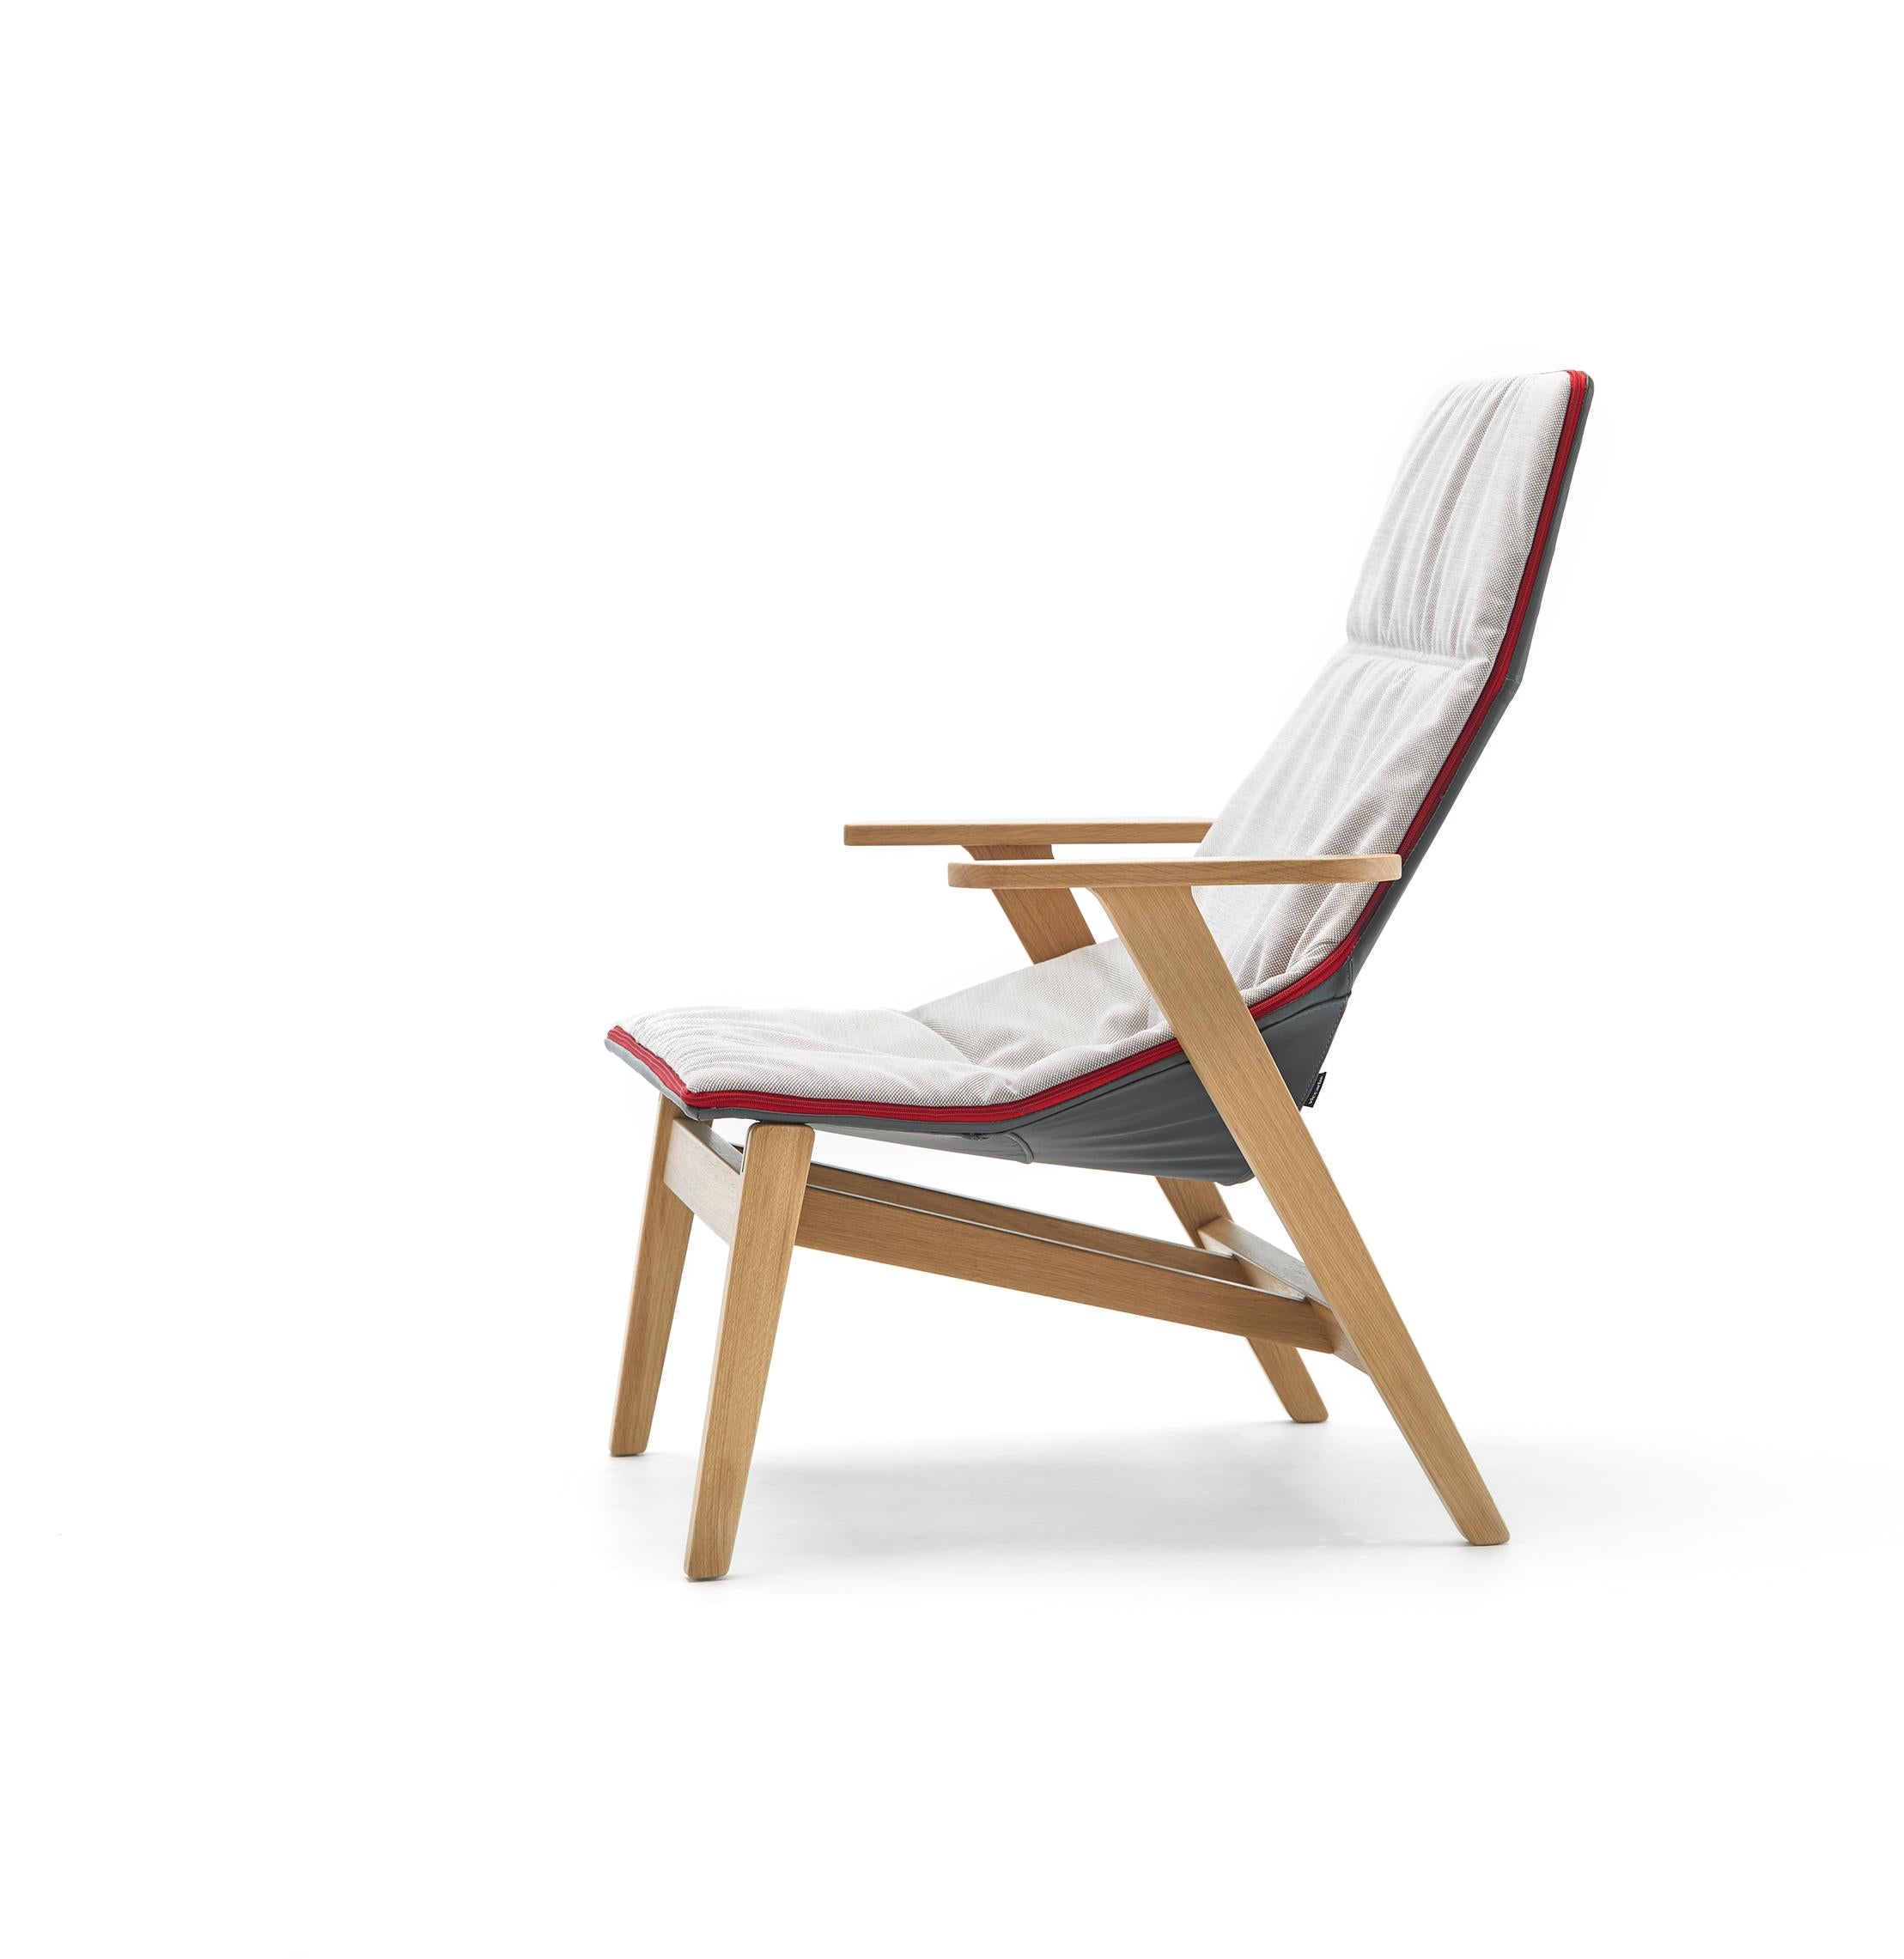 Contemporary Jean-Marie Massaud, Ace Lounge Chair with Arms, Viccarbe, 2009 For Sale